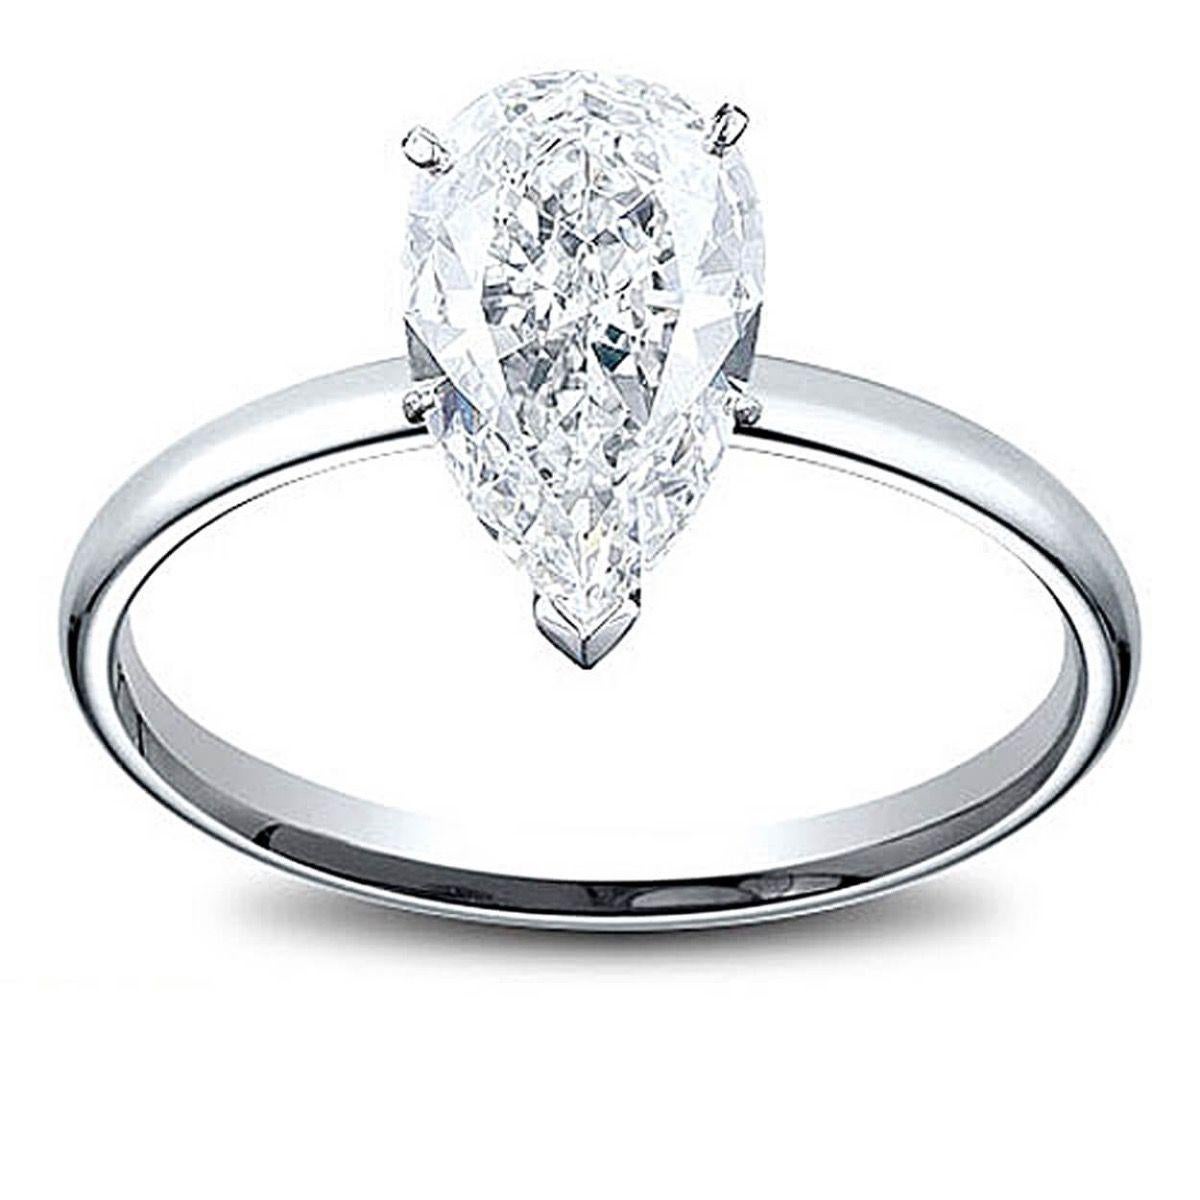 For Sale:  Made to Order GIA Certified Engagement Ring Pear Diamond Cut 4